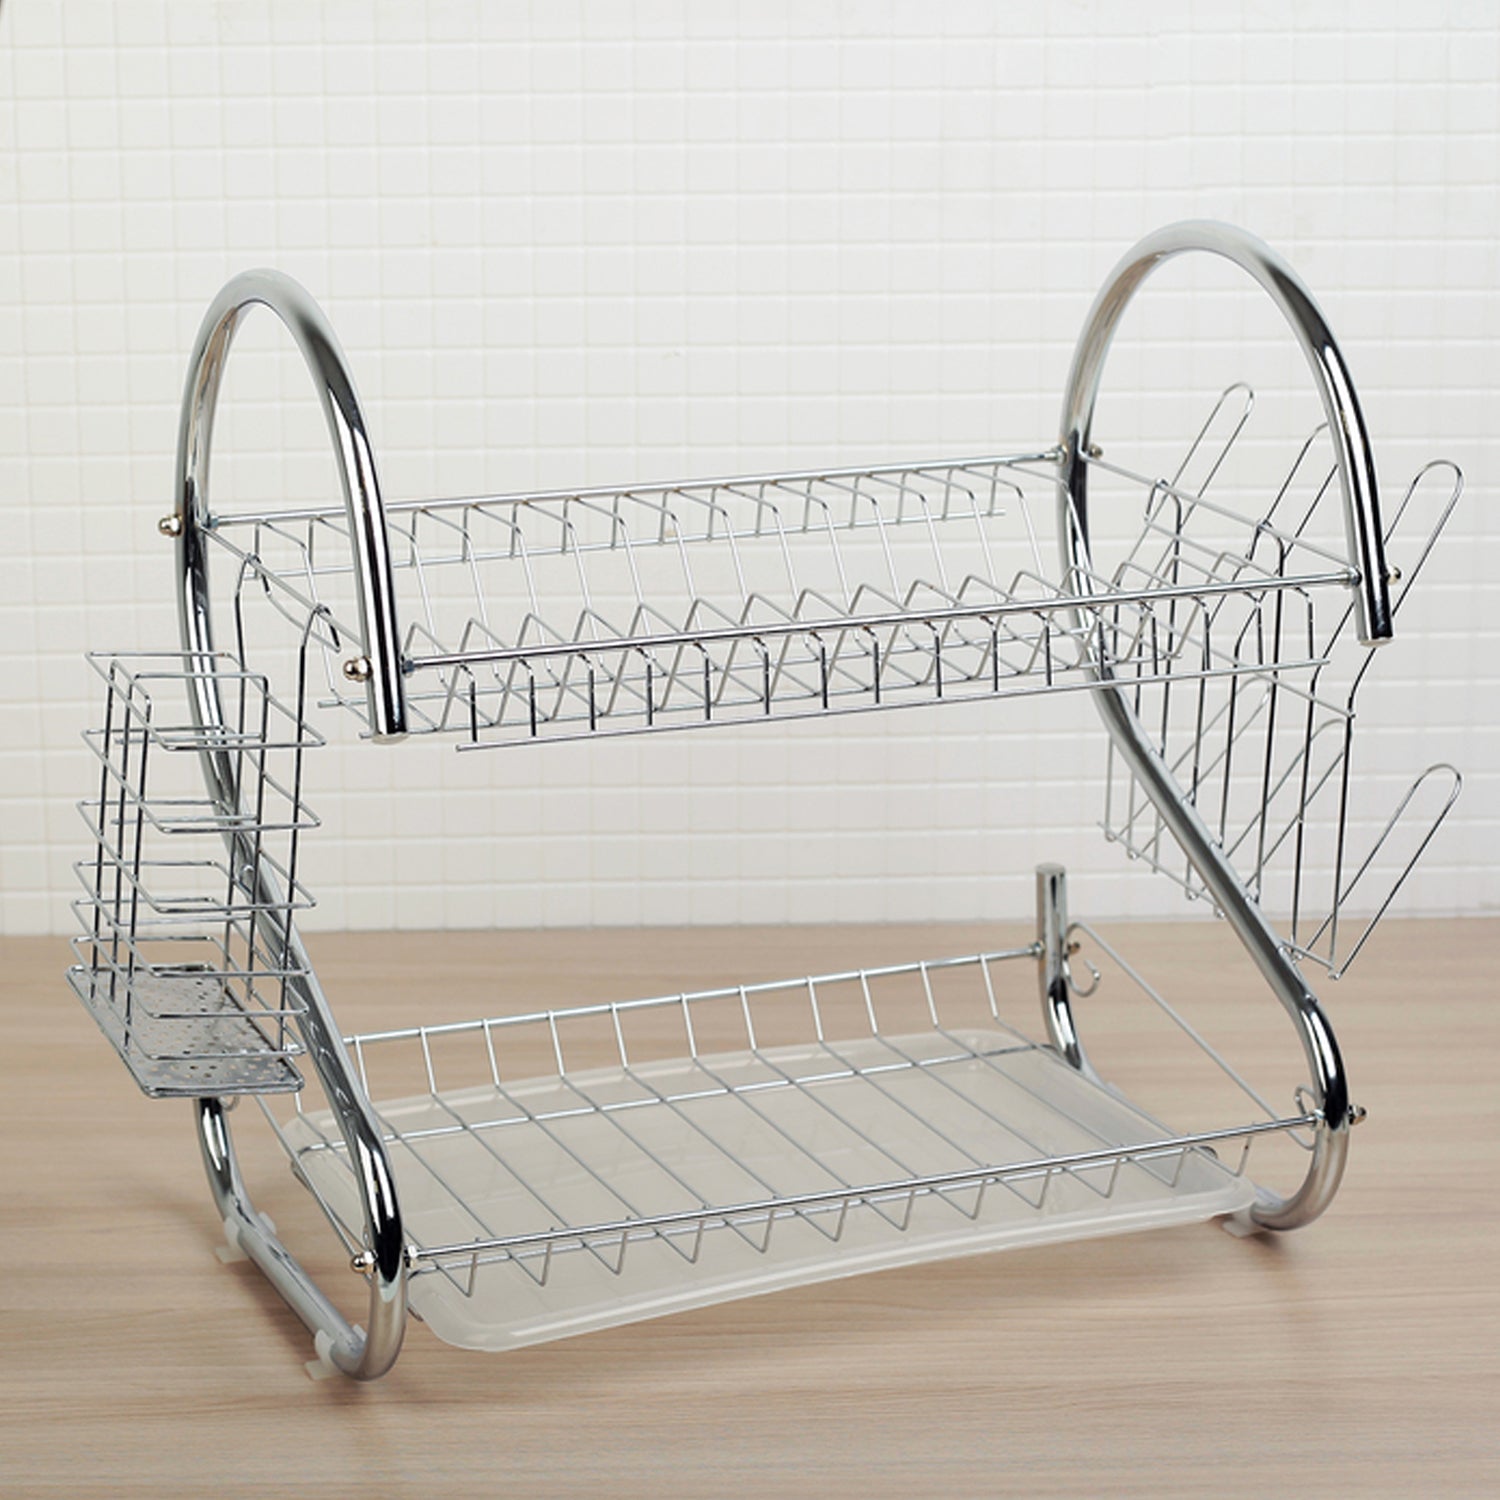 7668 Stainless Steel Drain Bowl Storage Rack Holder Plate Dish Cutlery Cup Rack with Tray Kitchen Shelf Stand DeoDap